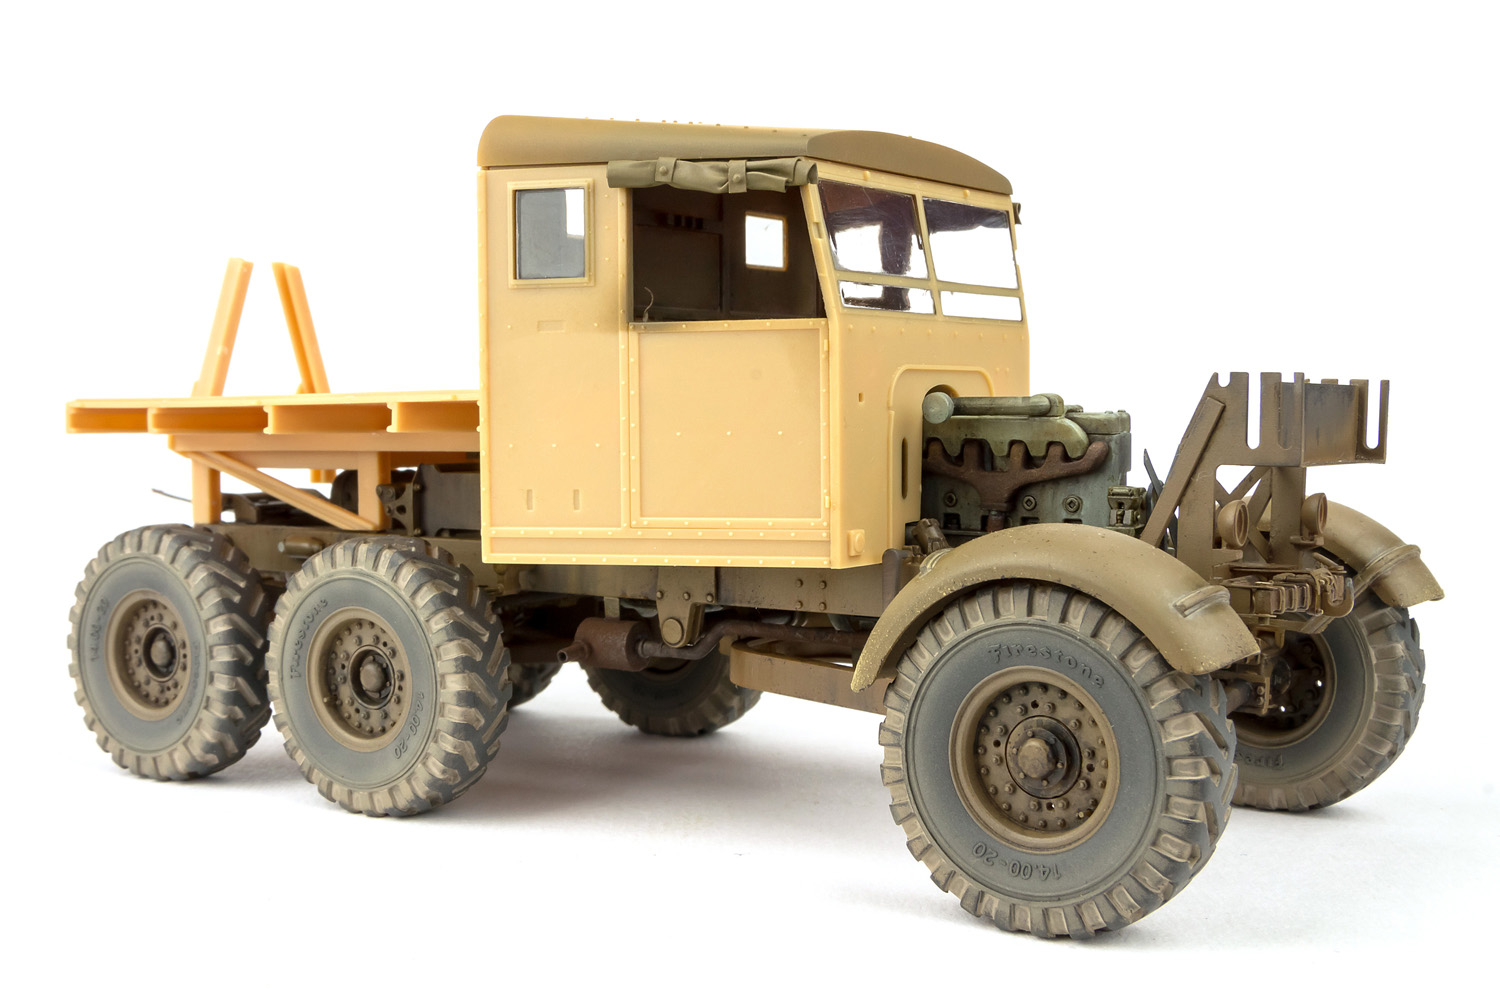 Build Guide Pt I: Andy's 35th scale IBG Models Scammell Pioneer SV2S g...